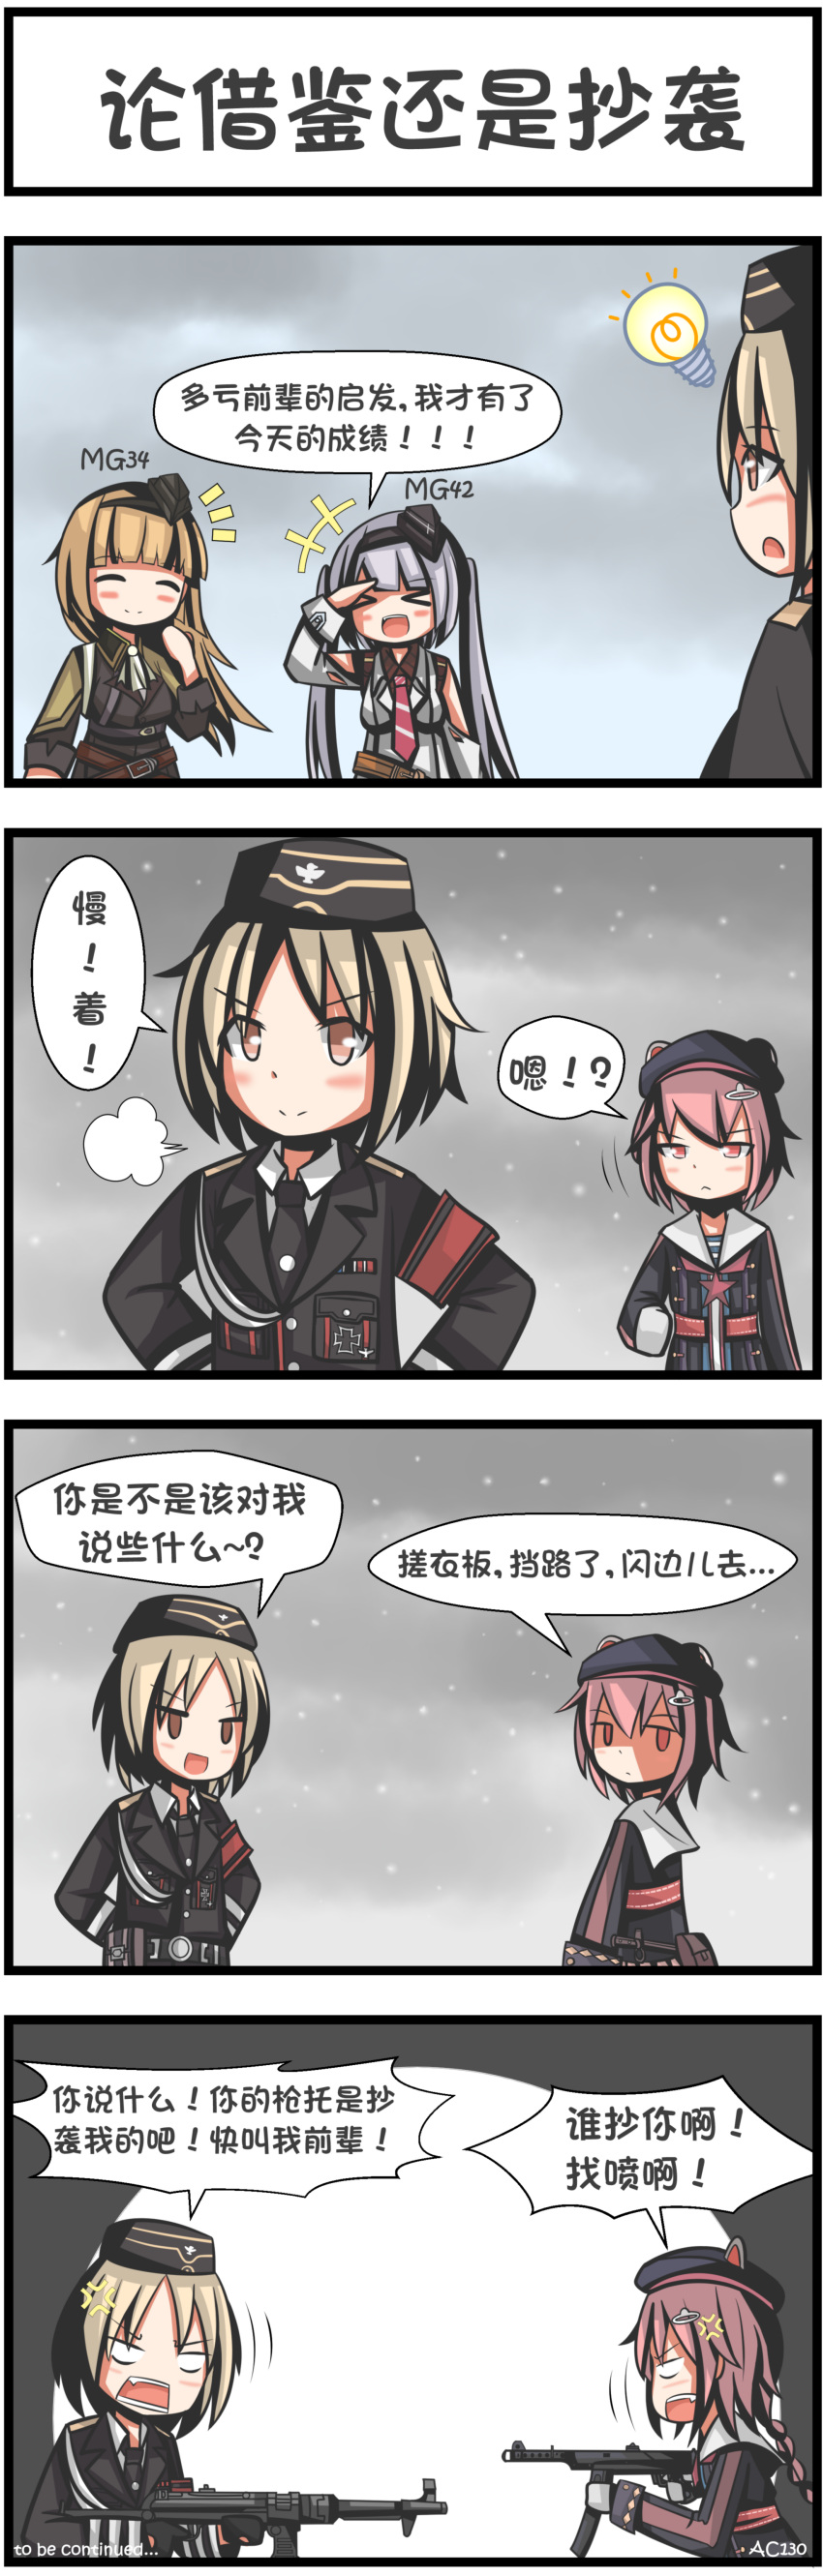 4girls 4koma absurdres ac130 angry blonde_hair brown_eyes character_name chinese comic german german_clothes girls_frontline gun hat highres long_hair mg34_(girls_frontline) mg42_(girls_frontline) military military_uniform mp38 mp38_(girls_frontline) multiple_girls pink_hair pps-43 pps-43_(girls_frontline) red_eyes russian russian_clothes short_hair silver_hair submachine_gun translation_request uniform weapon